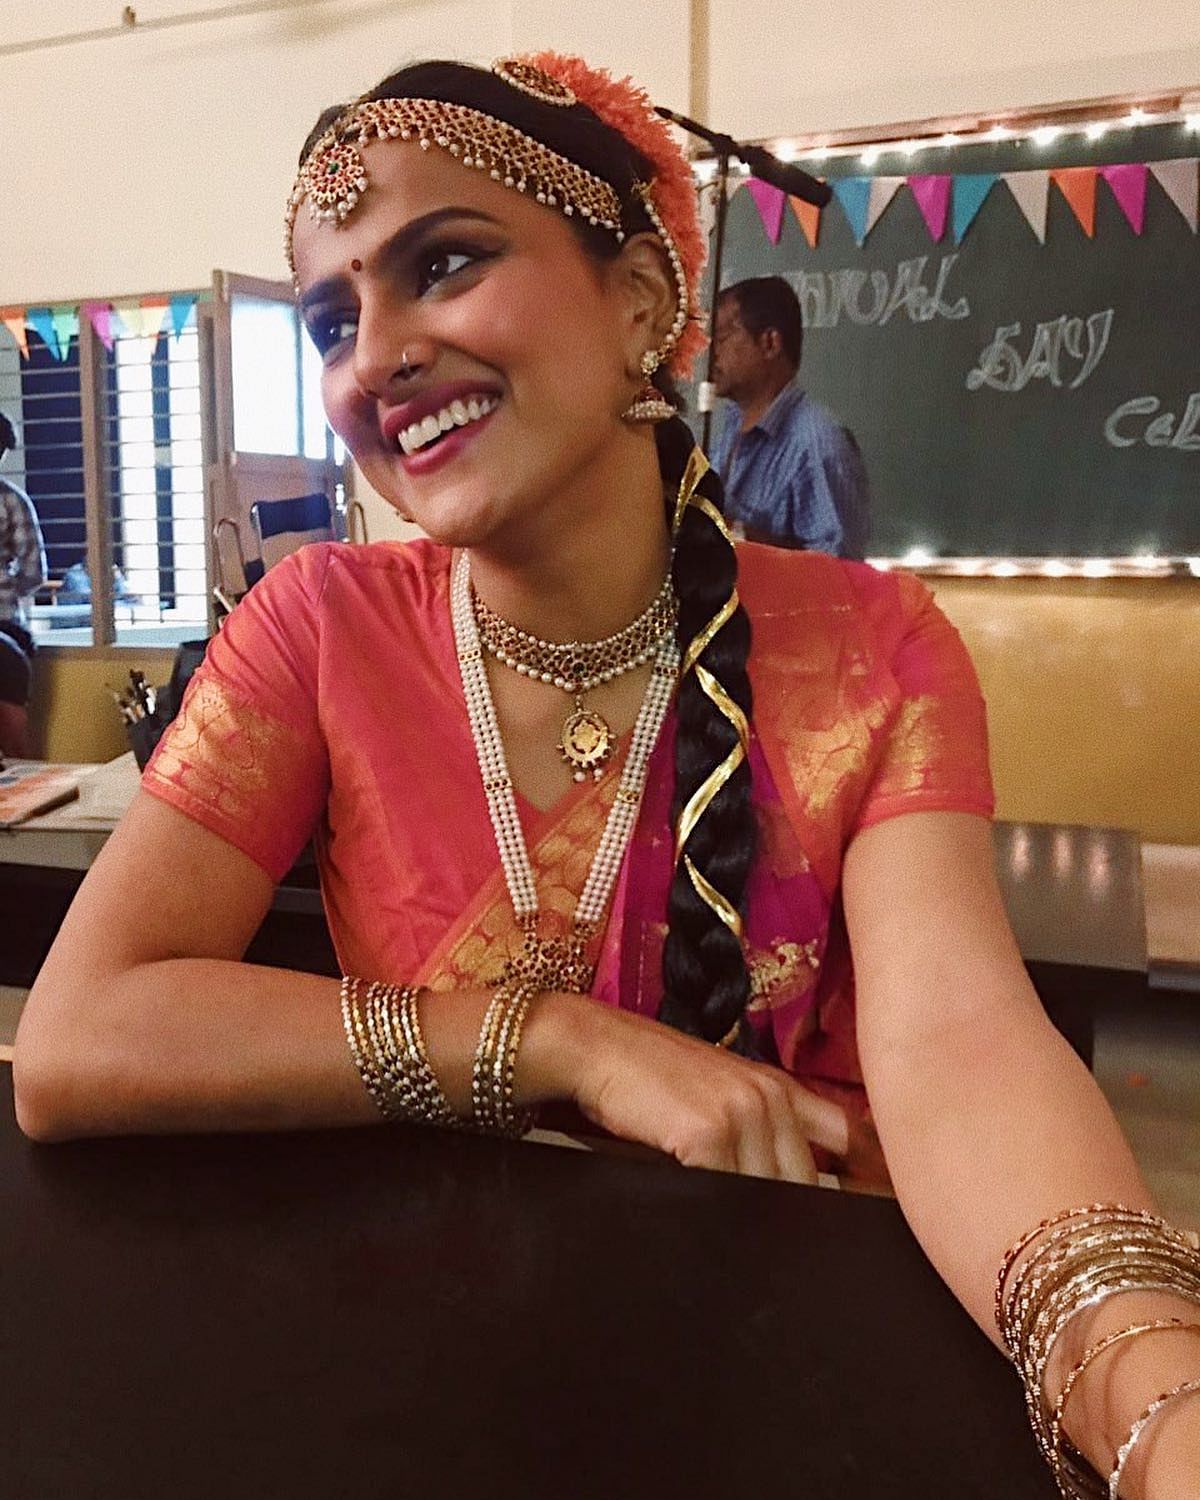 Shraddha Srinath’s post about the 'desirability' of married actresses goes viral